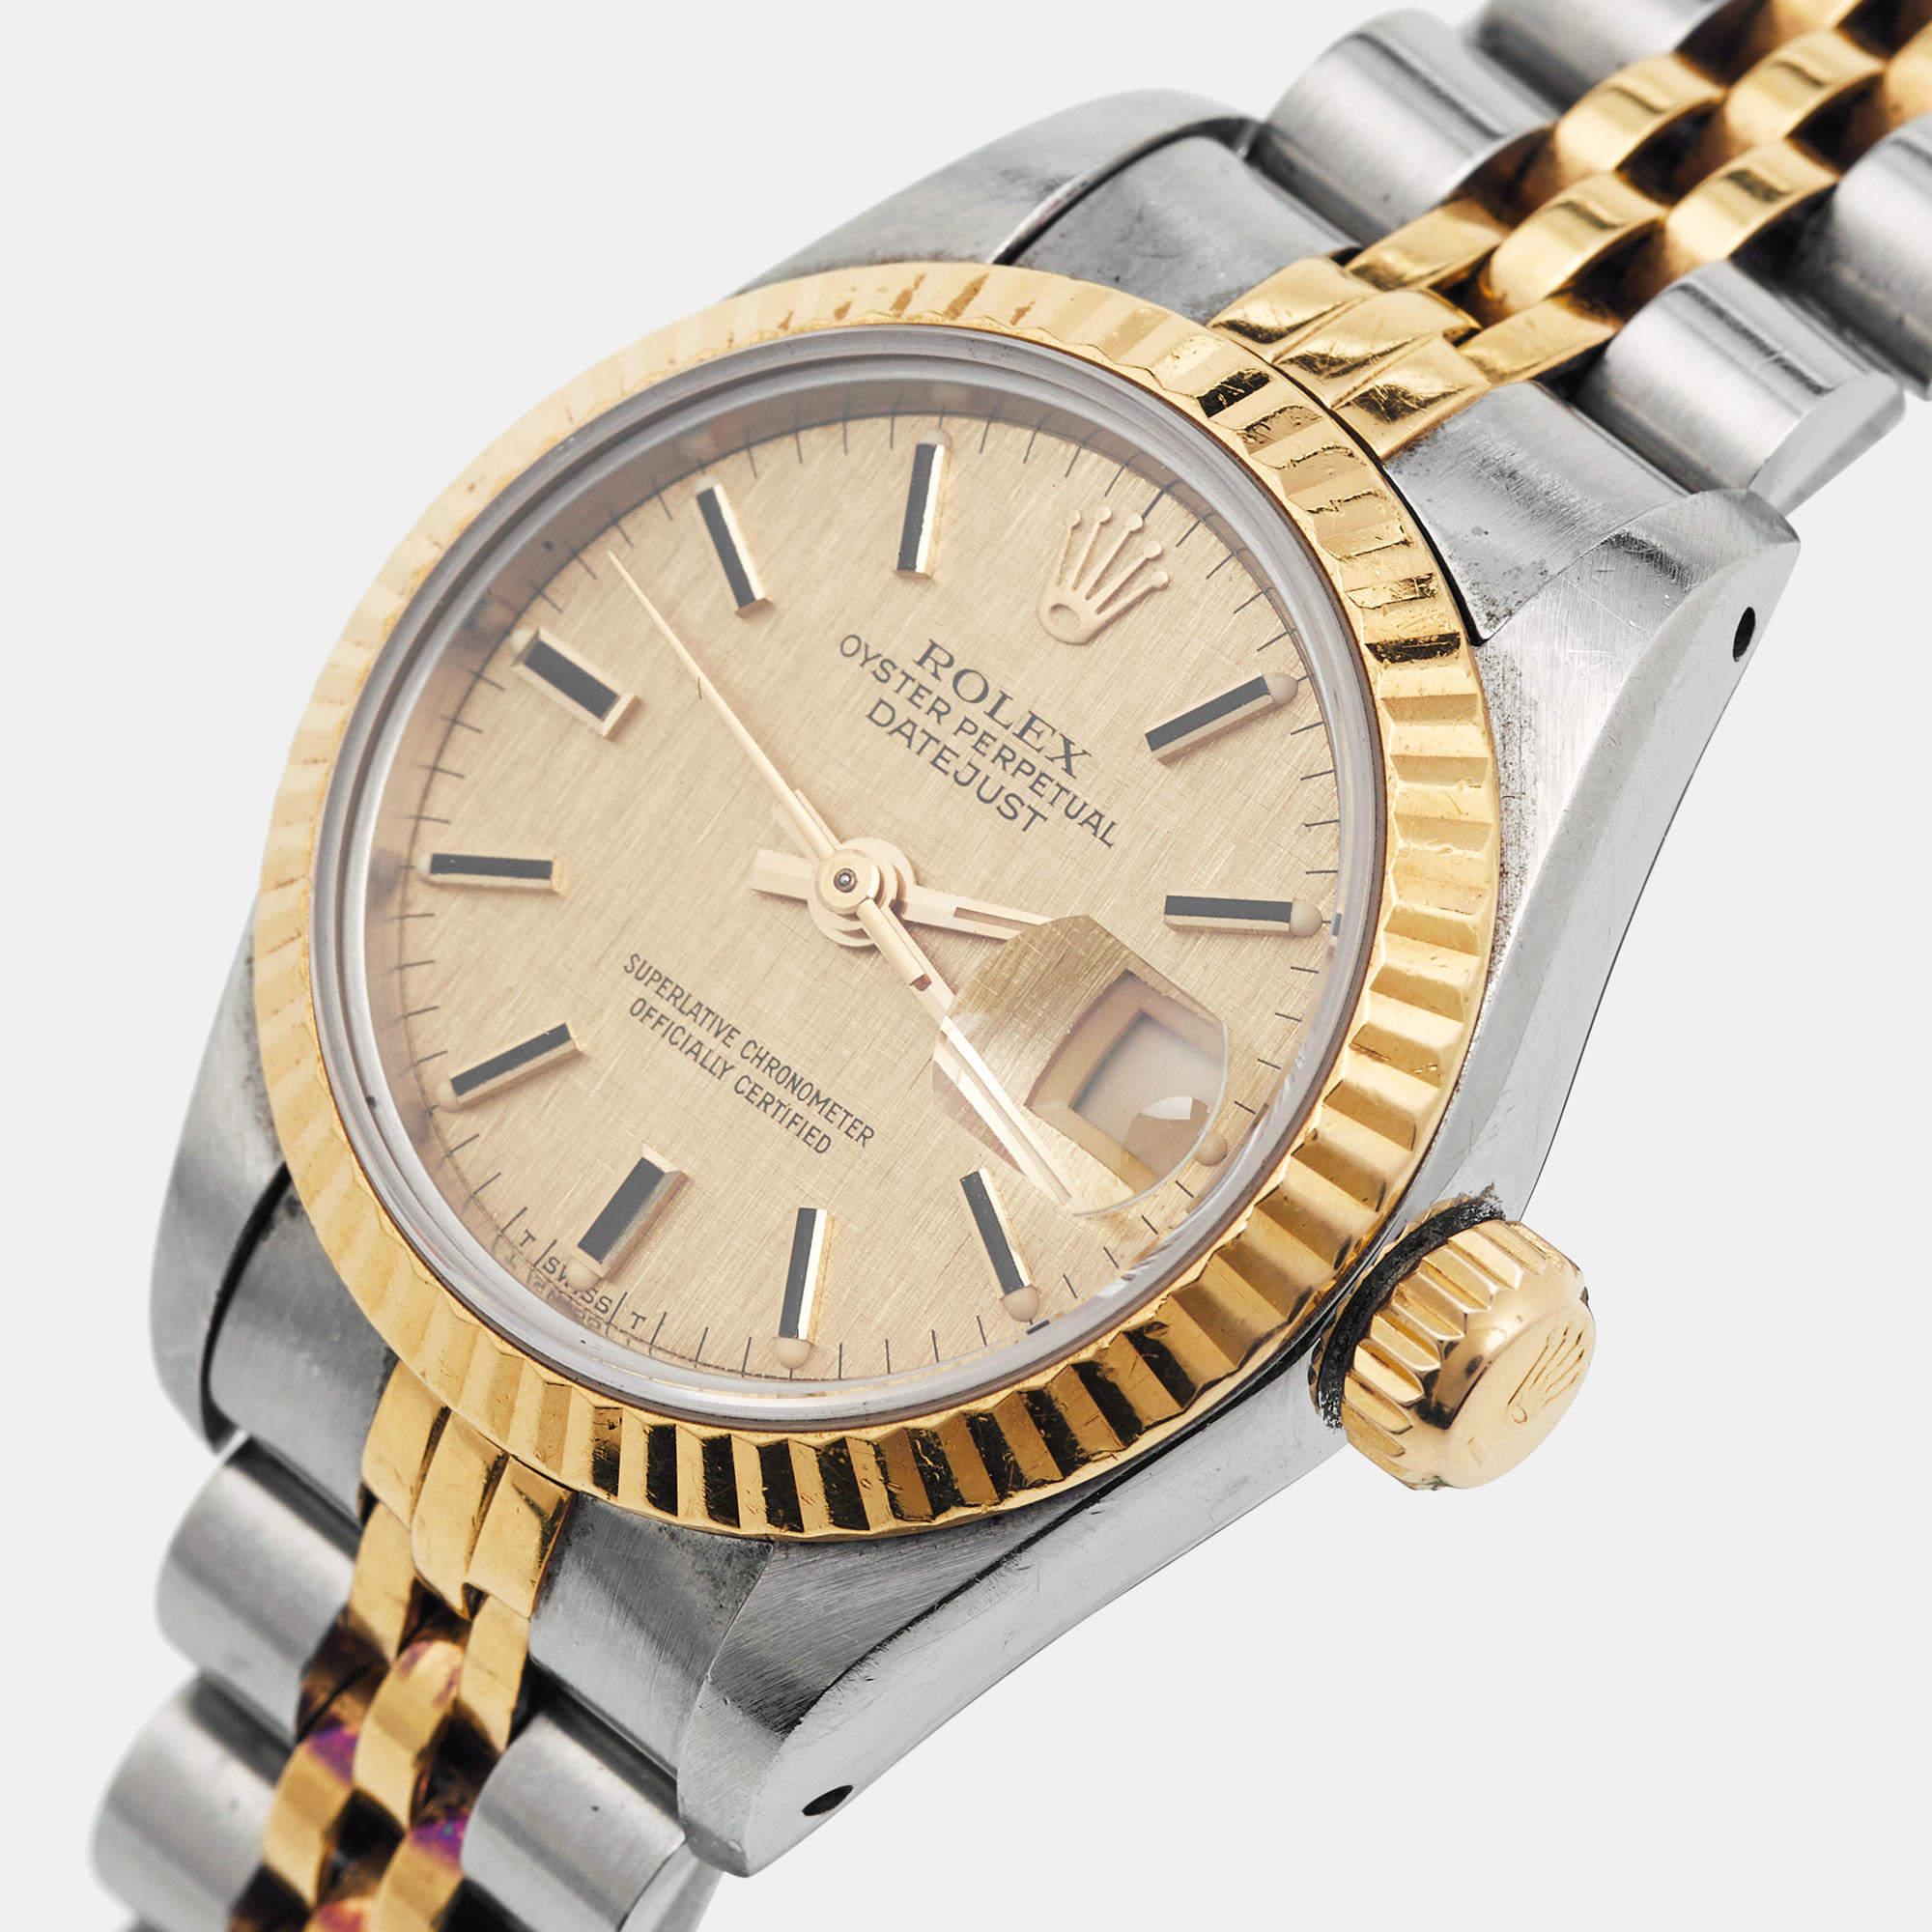 A luxury watch you will love having in your collection is this one from Rolex. Celebrated for its classy style details, innovation, and luxe factor, Rolex delivers some of the most coveted watches in the world. You'll enjoy wearing this one.

